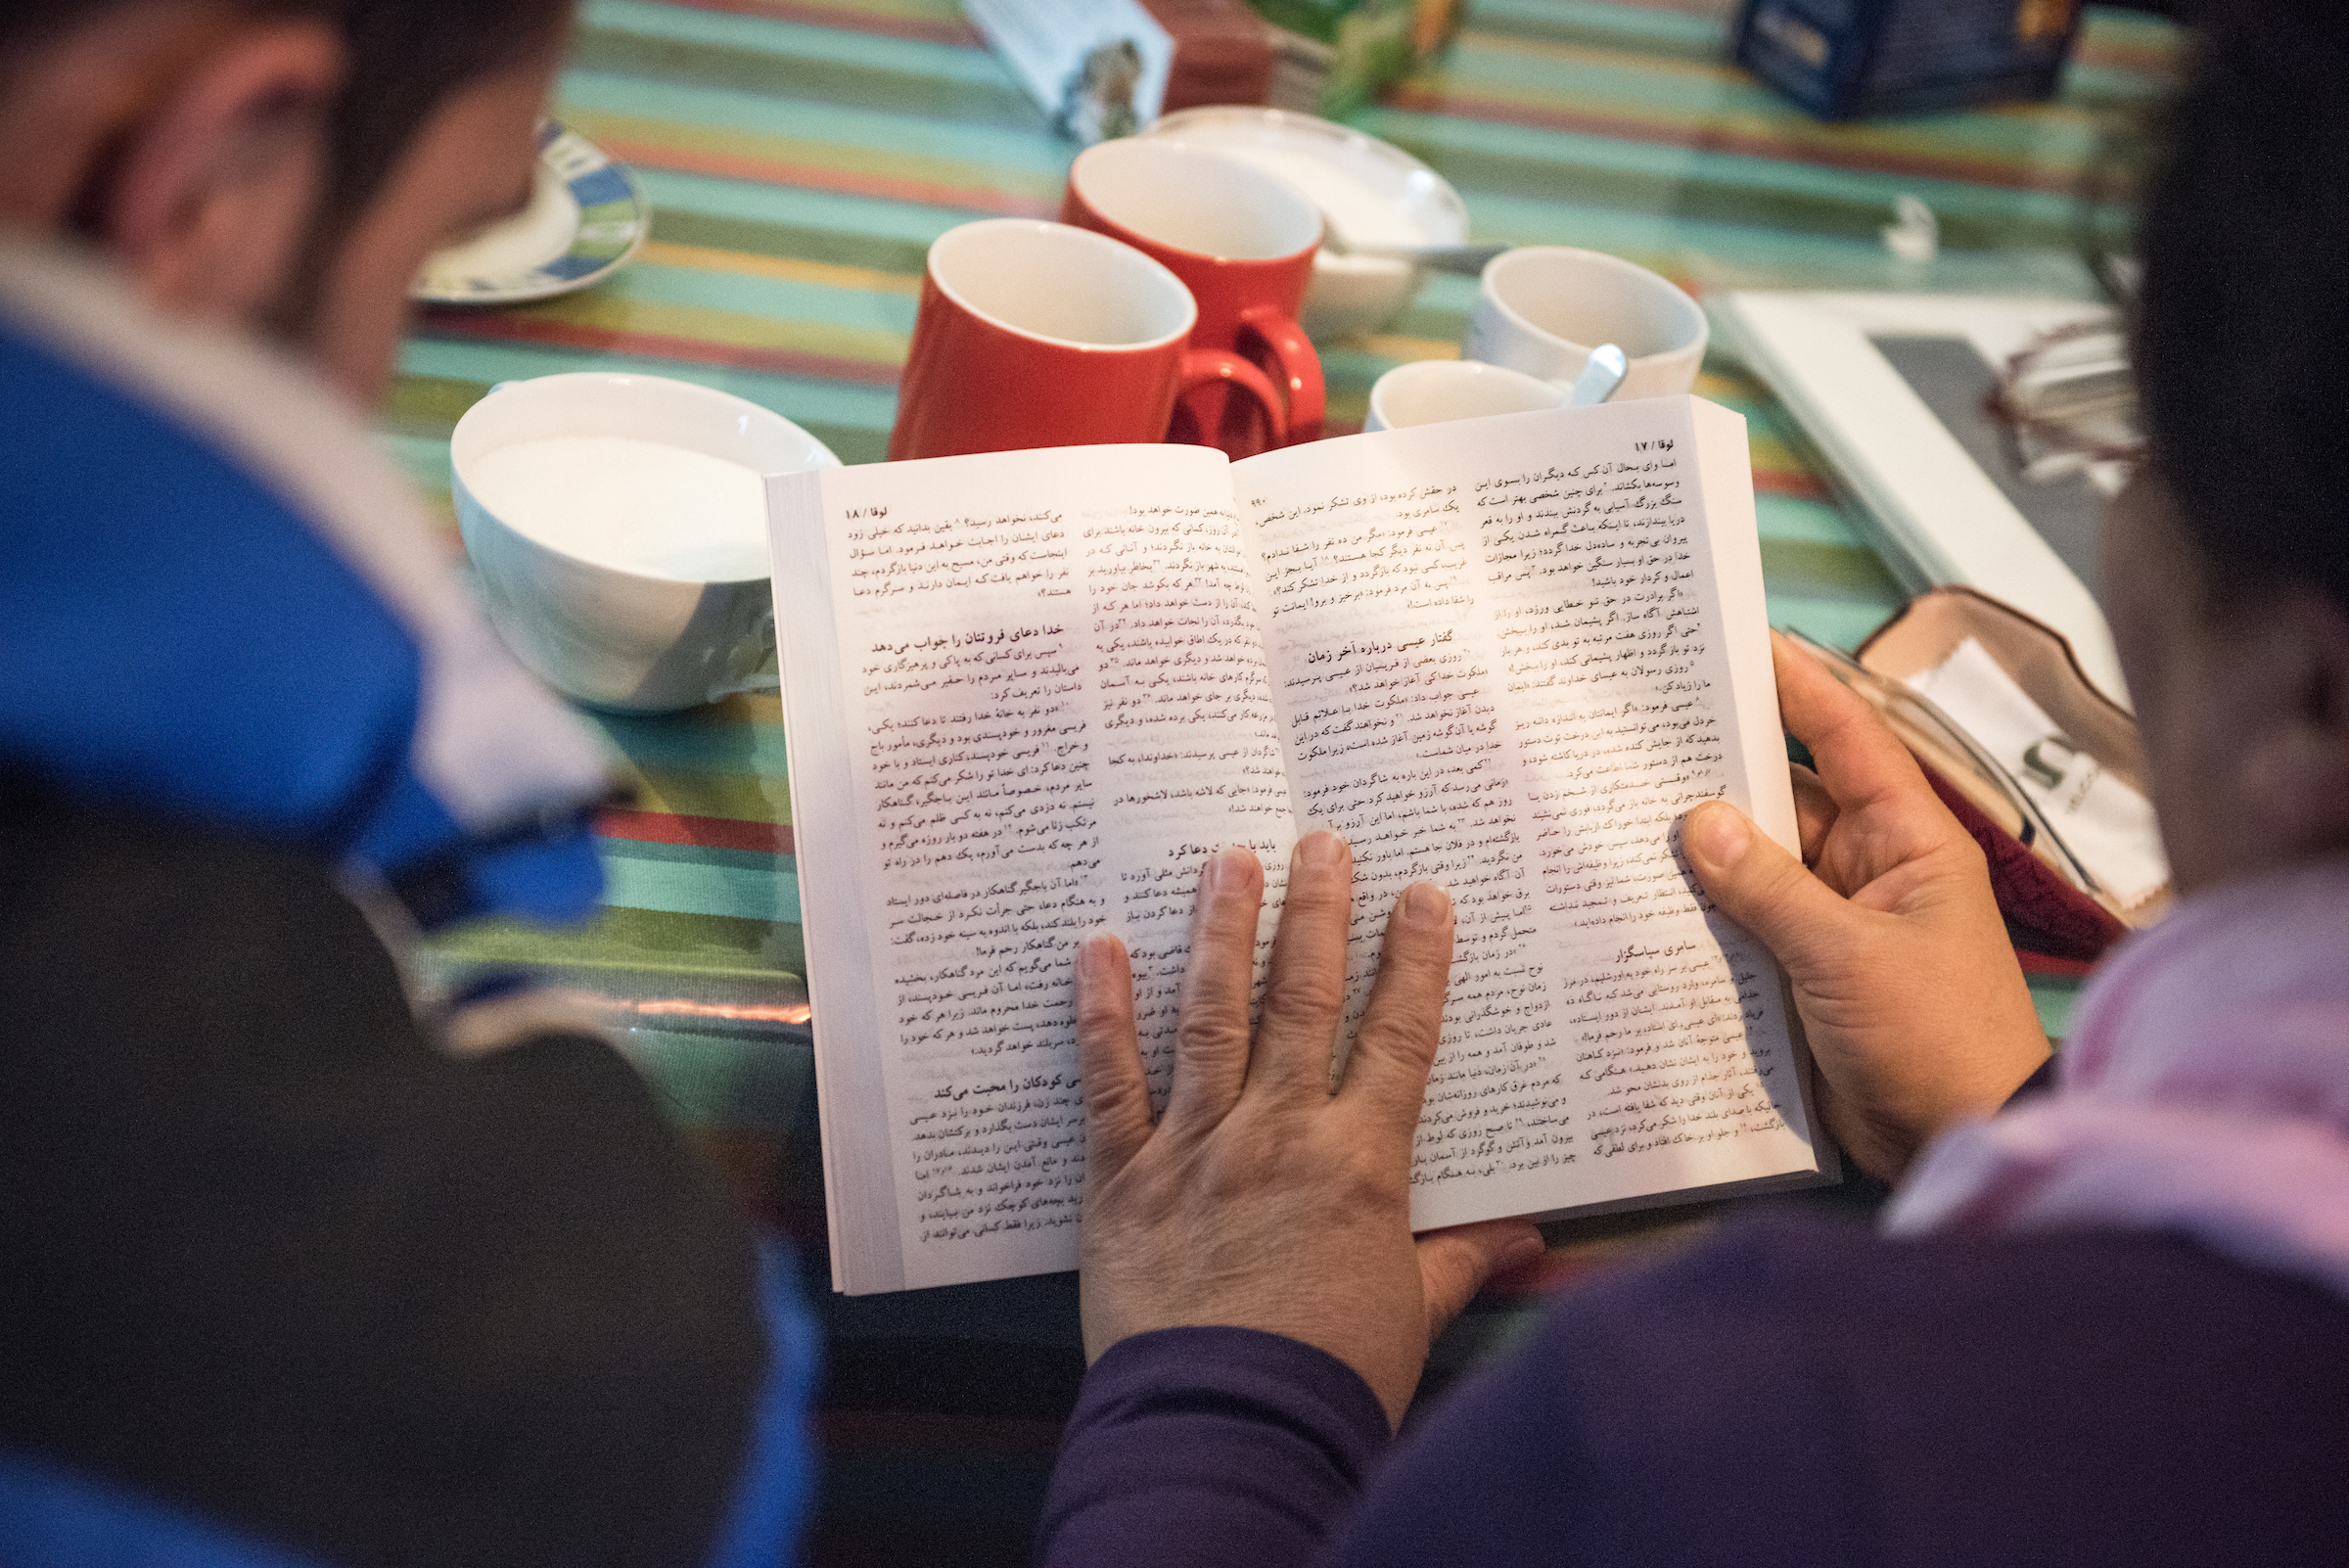 Christian refugees read from a translated Bible during a Bible study on Friday, Nov. 13, 2015, near the Evangelisch-Lutherische St. Trinitatisgemeinde, a SELK Lutheran church in Leipzig, Germany. LCMS Communications/Erik M. Lunsford